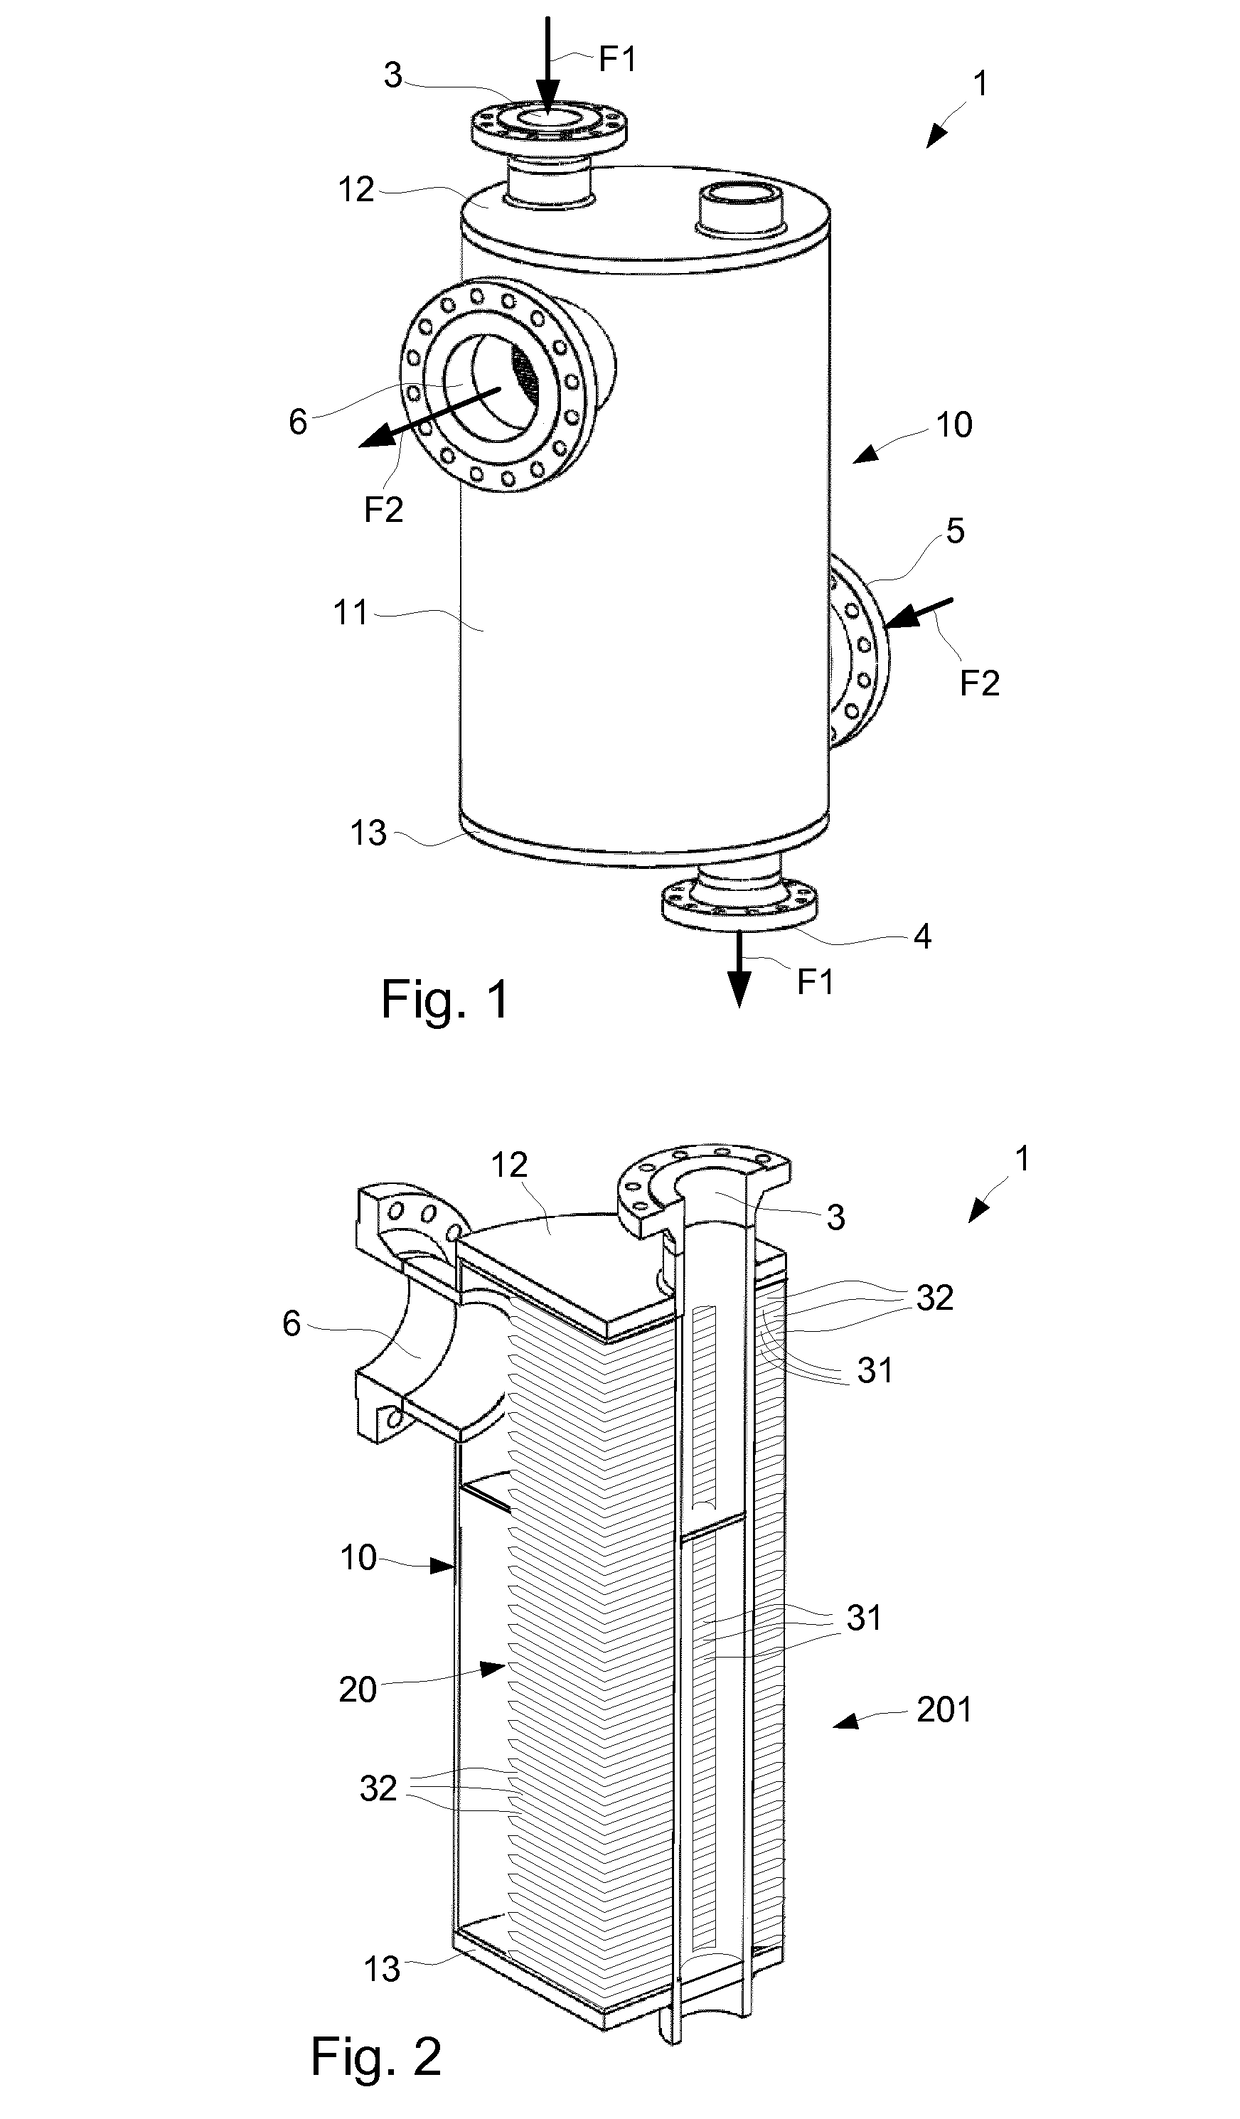 Heat transfer plate and plate heat exchanger